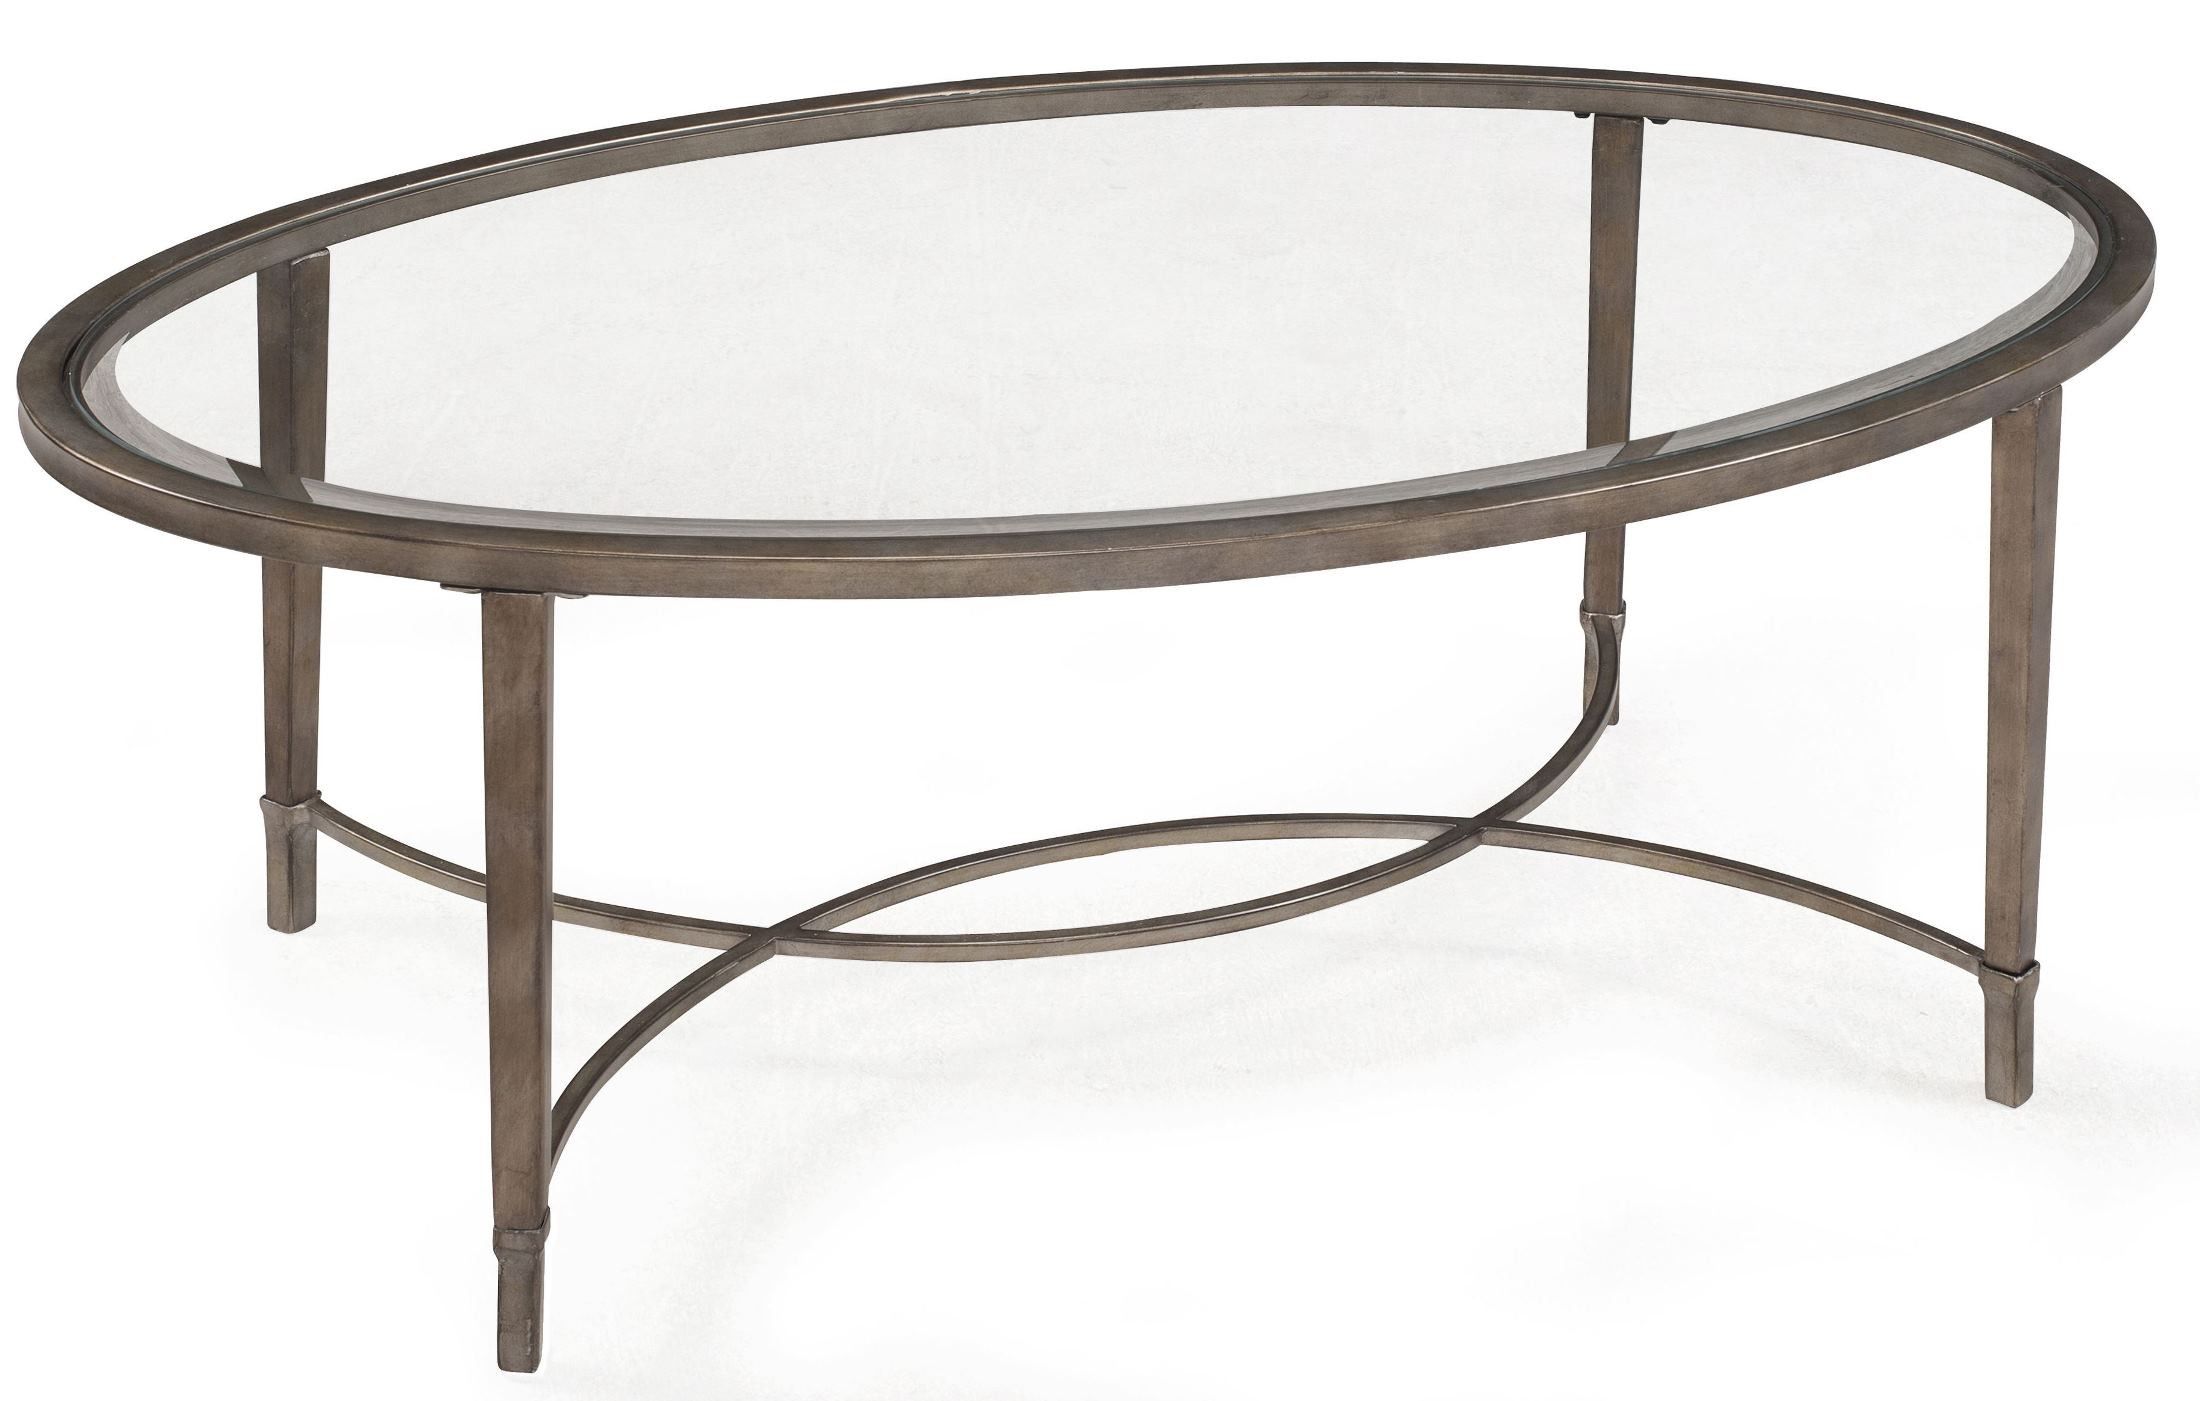 Copia Oval Cocktail Table From Magnussen Home (t2114 47 Pertaining To Glass And Gold Oval Coffee Tables (View 4 of 15)